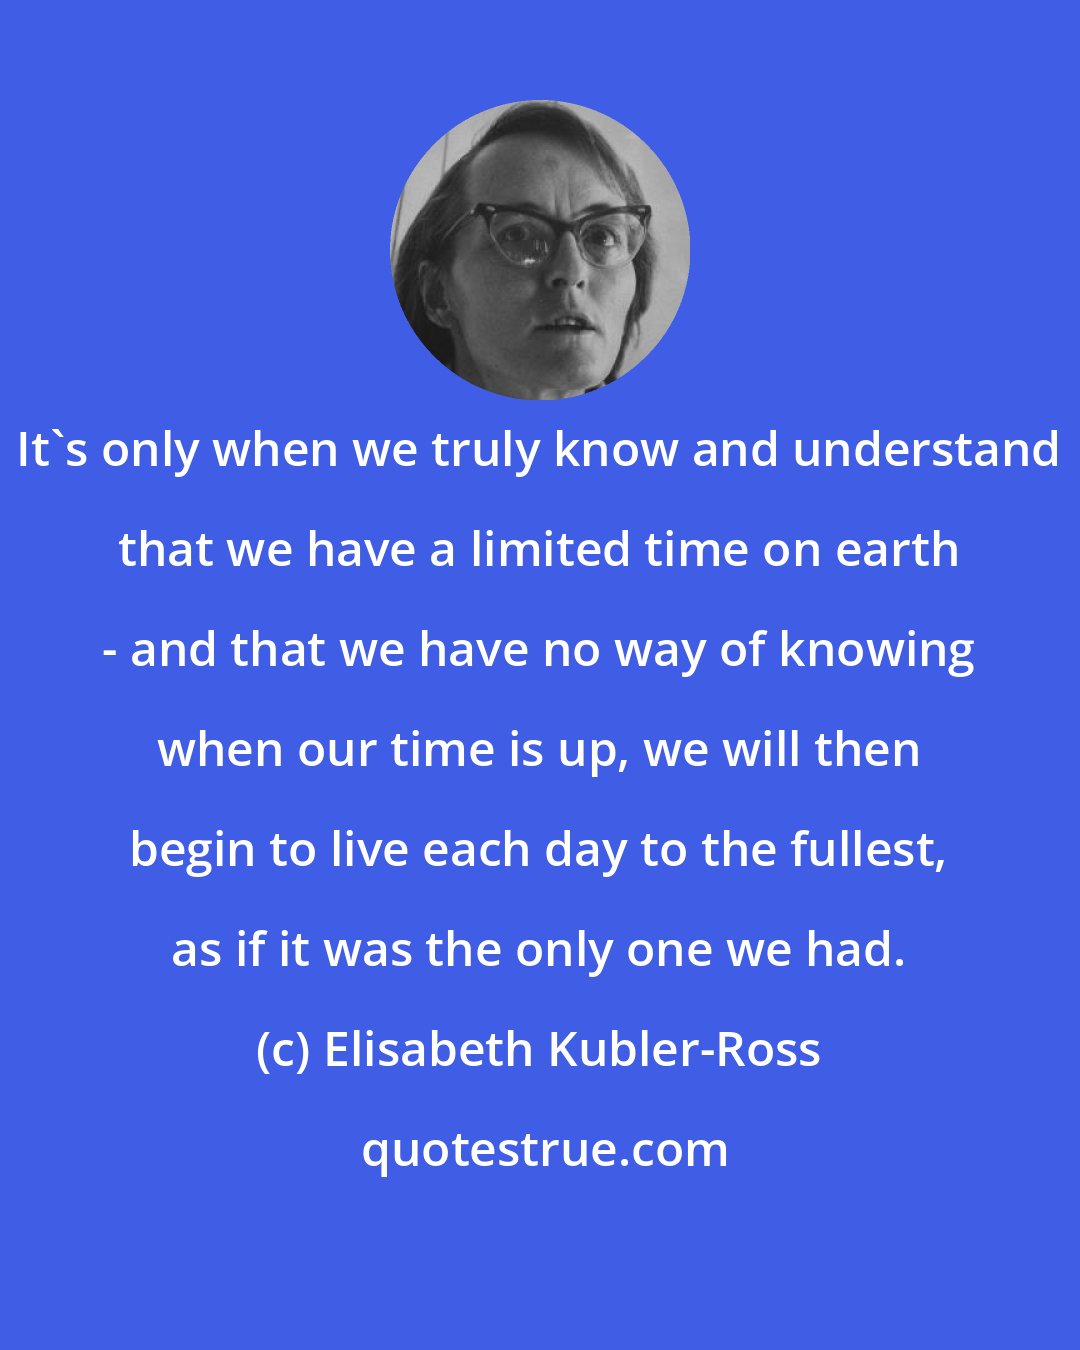 Elisabeth Kubler-Ross: It's only when we truly know and understand that we have a limited time on earth - and that we have no way of knowing when our time is up, we will then begin to live each day to the fullest, as if it was the only one we had.